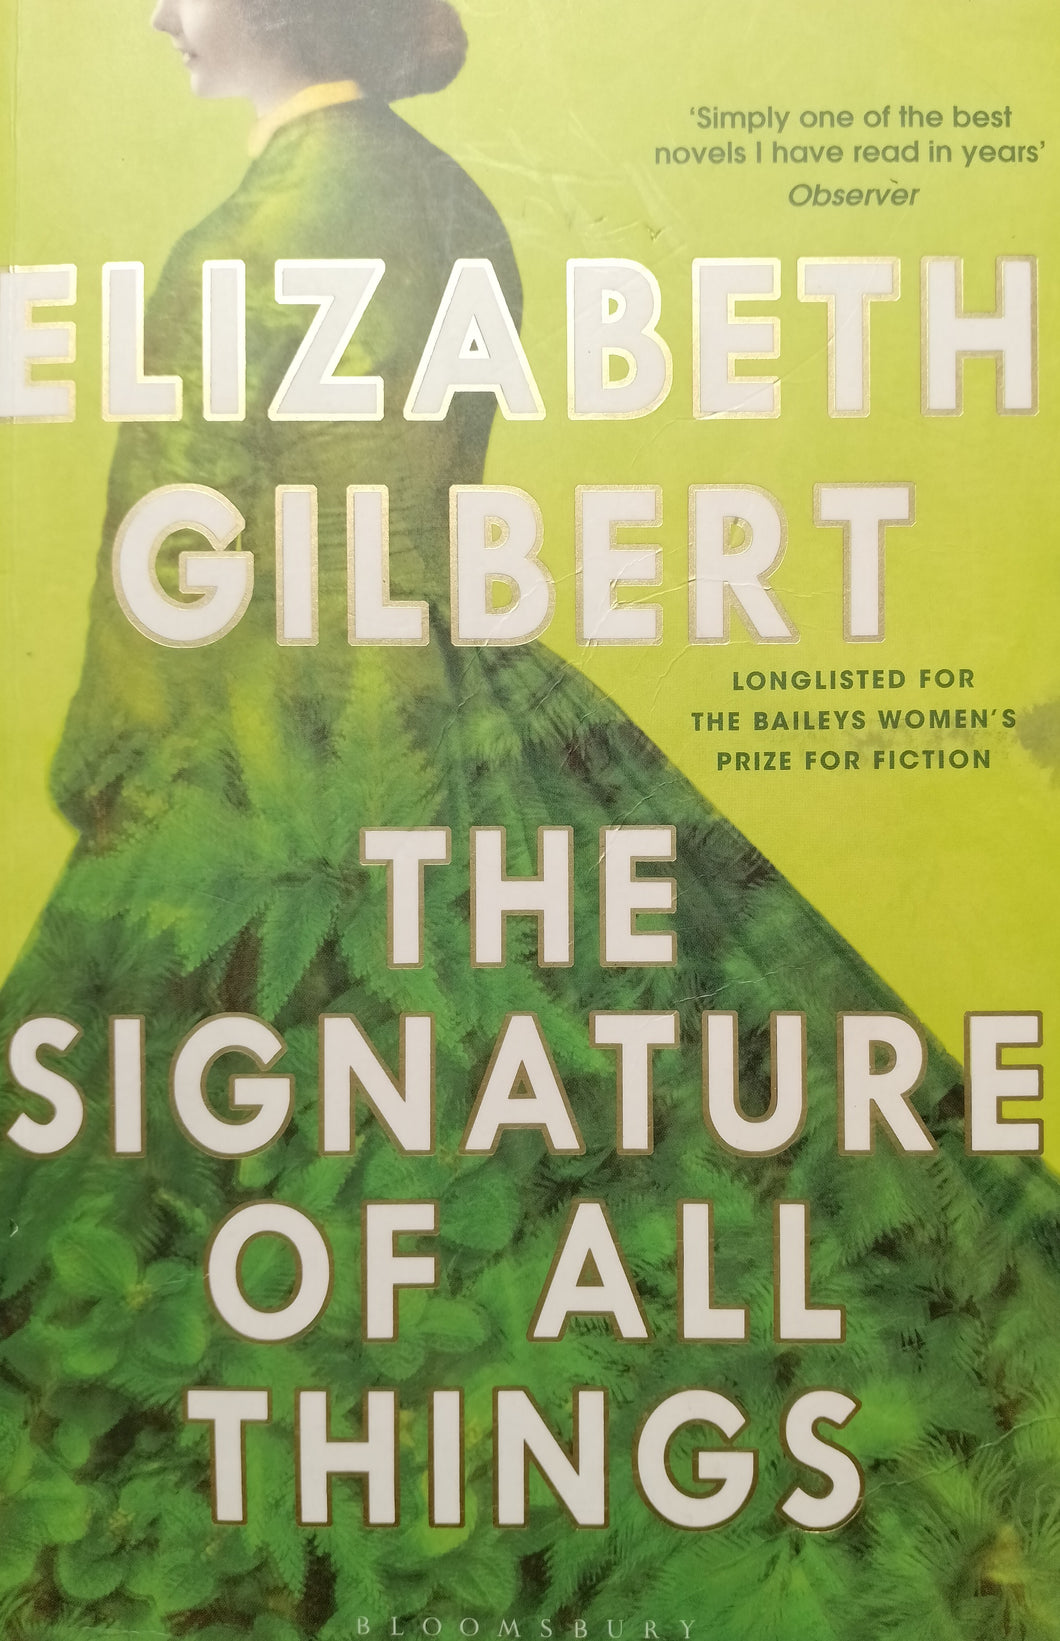 The Signature Of All Things by Elizabeth Gilbert